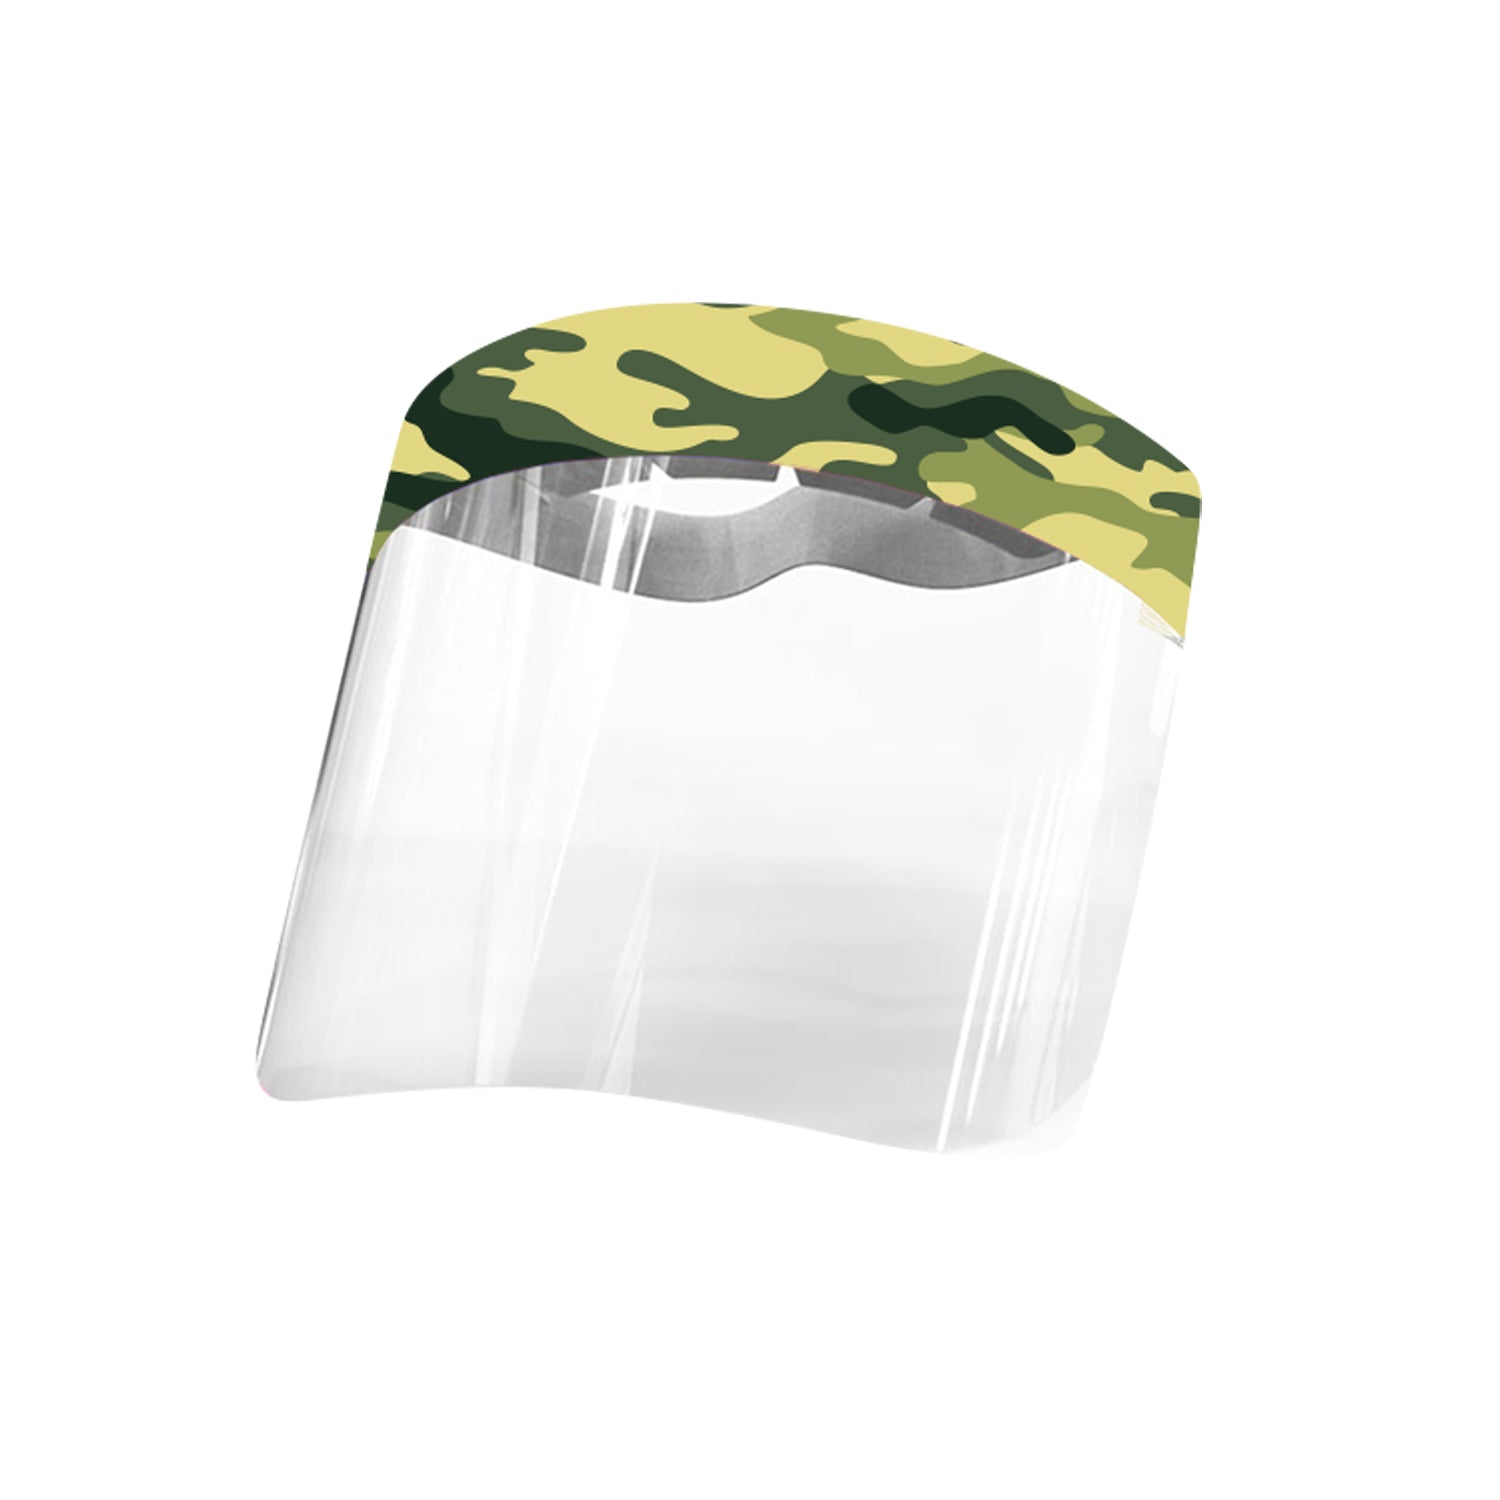 High quality face shields designed to stop any droplets from coughs or sneezes! Keep you and your family protected! Comfortable, Durable, Quality Material. Comes with removable protective liner. Easy To Clean.  Comes with adjustable strap. Crystal clear transparency. Lightweight for tweens, teens and young adults. Camouflage design.